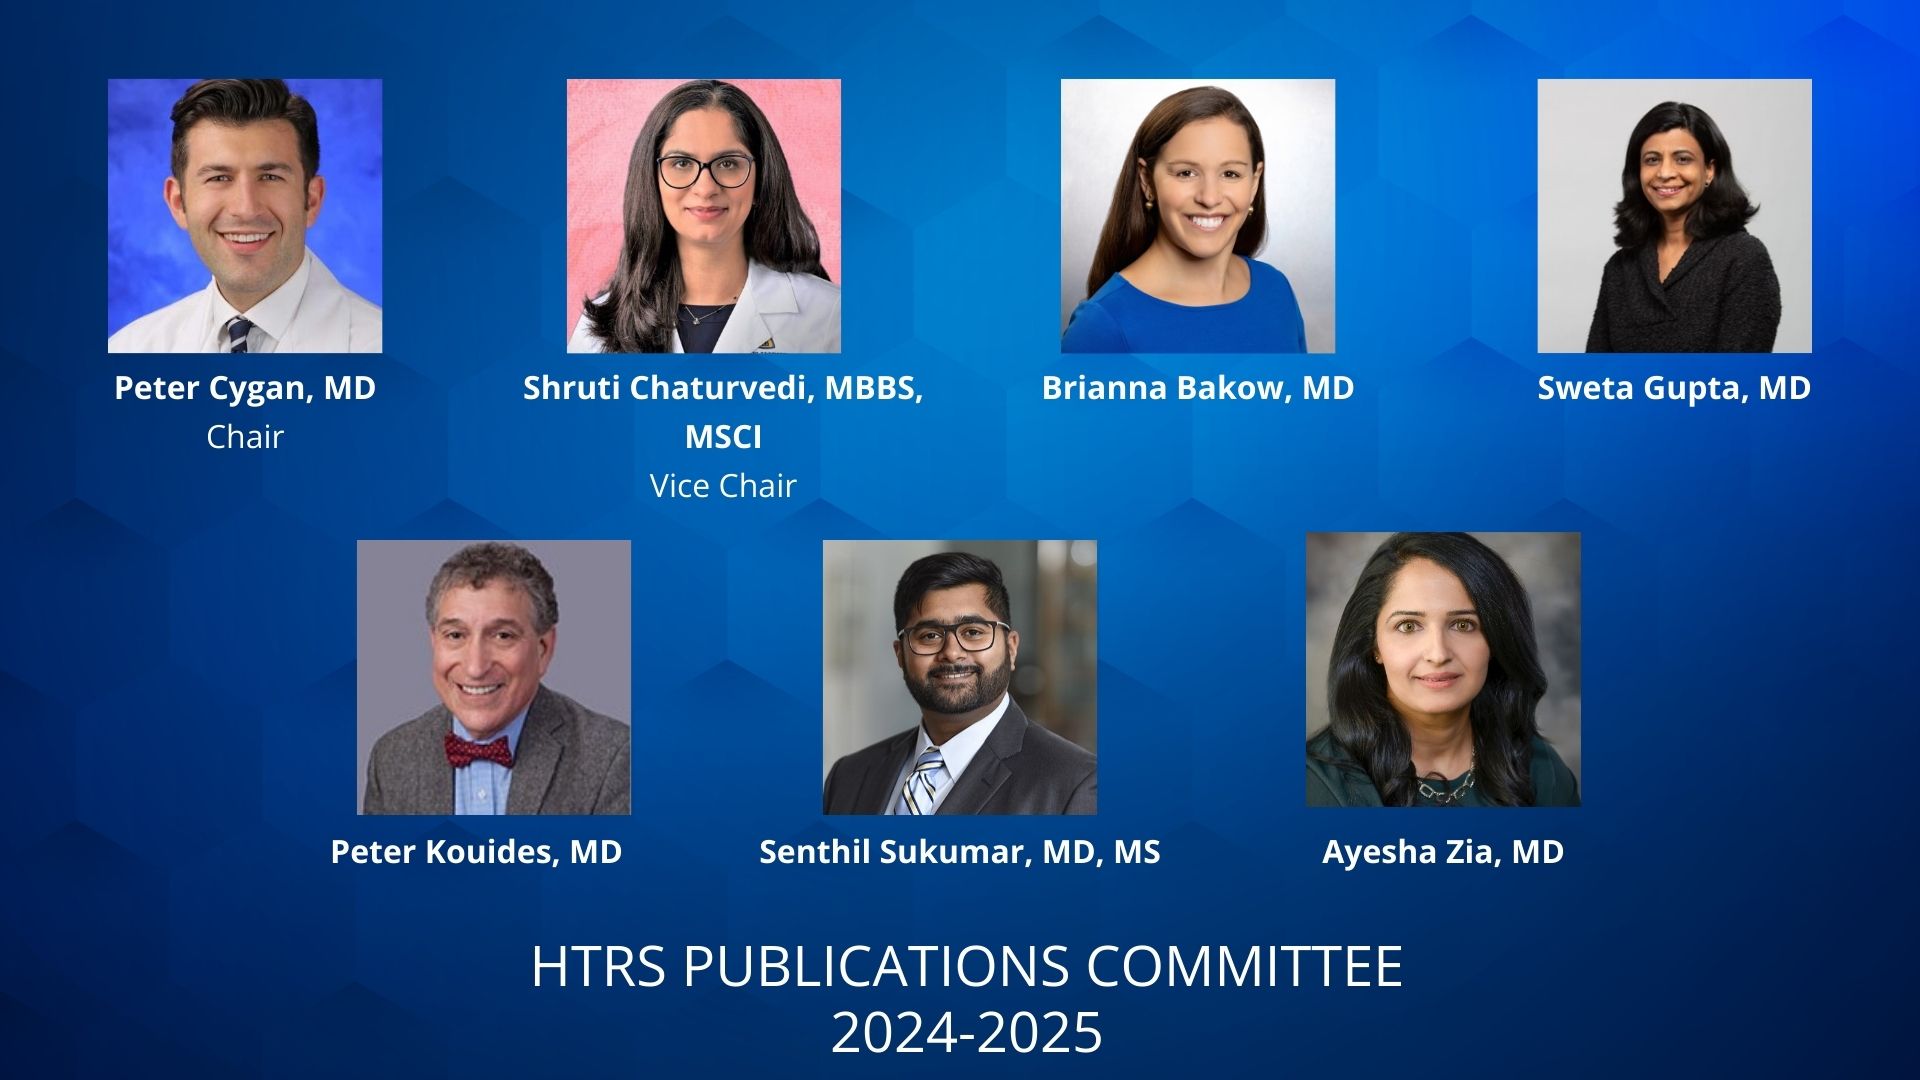 HTRS Publications Committee 2024-2025